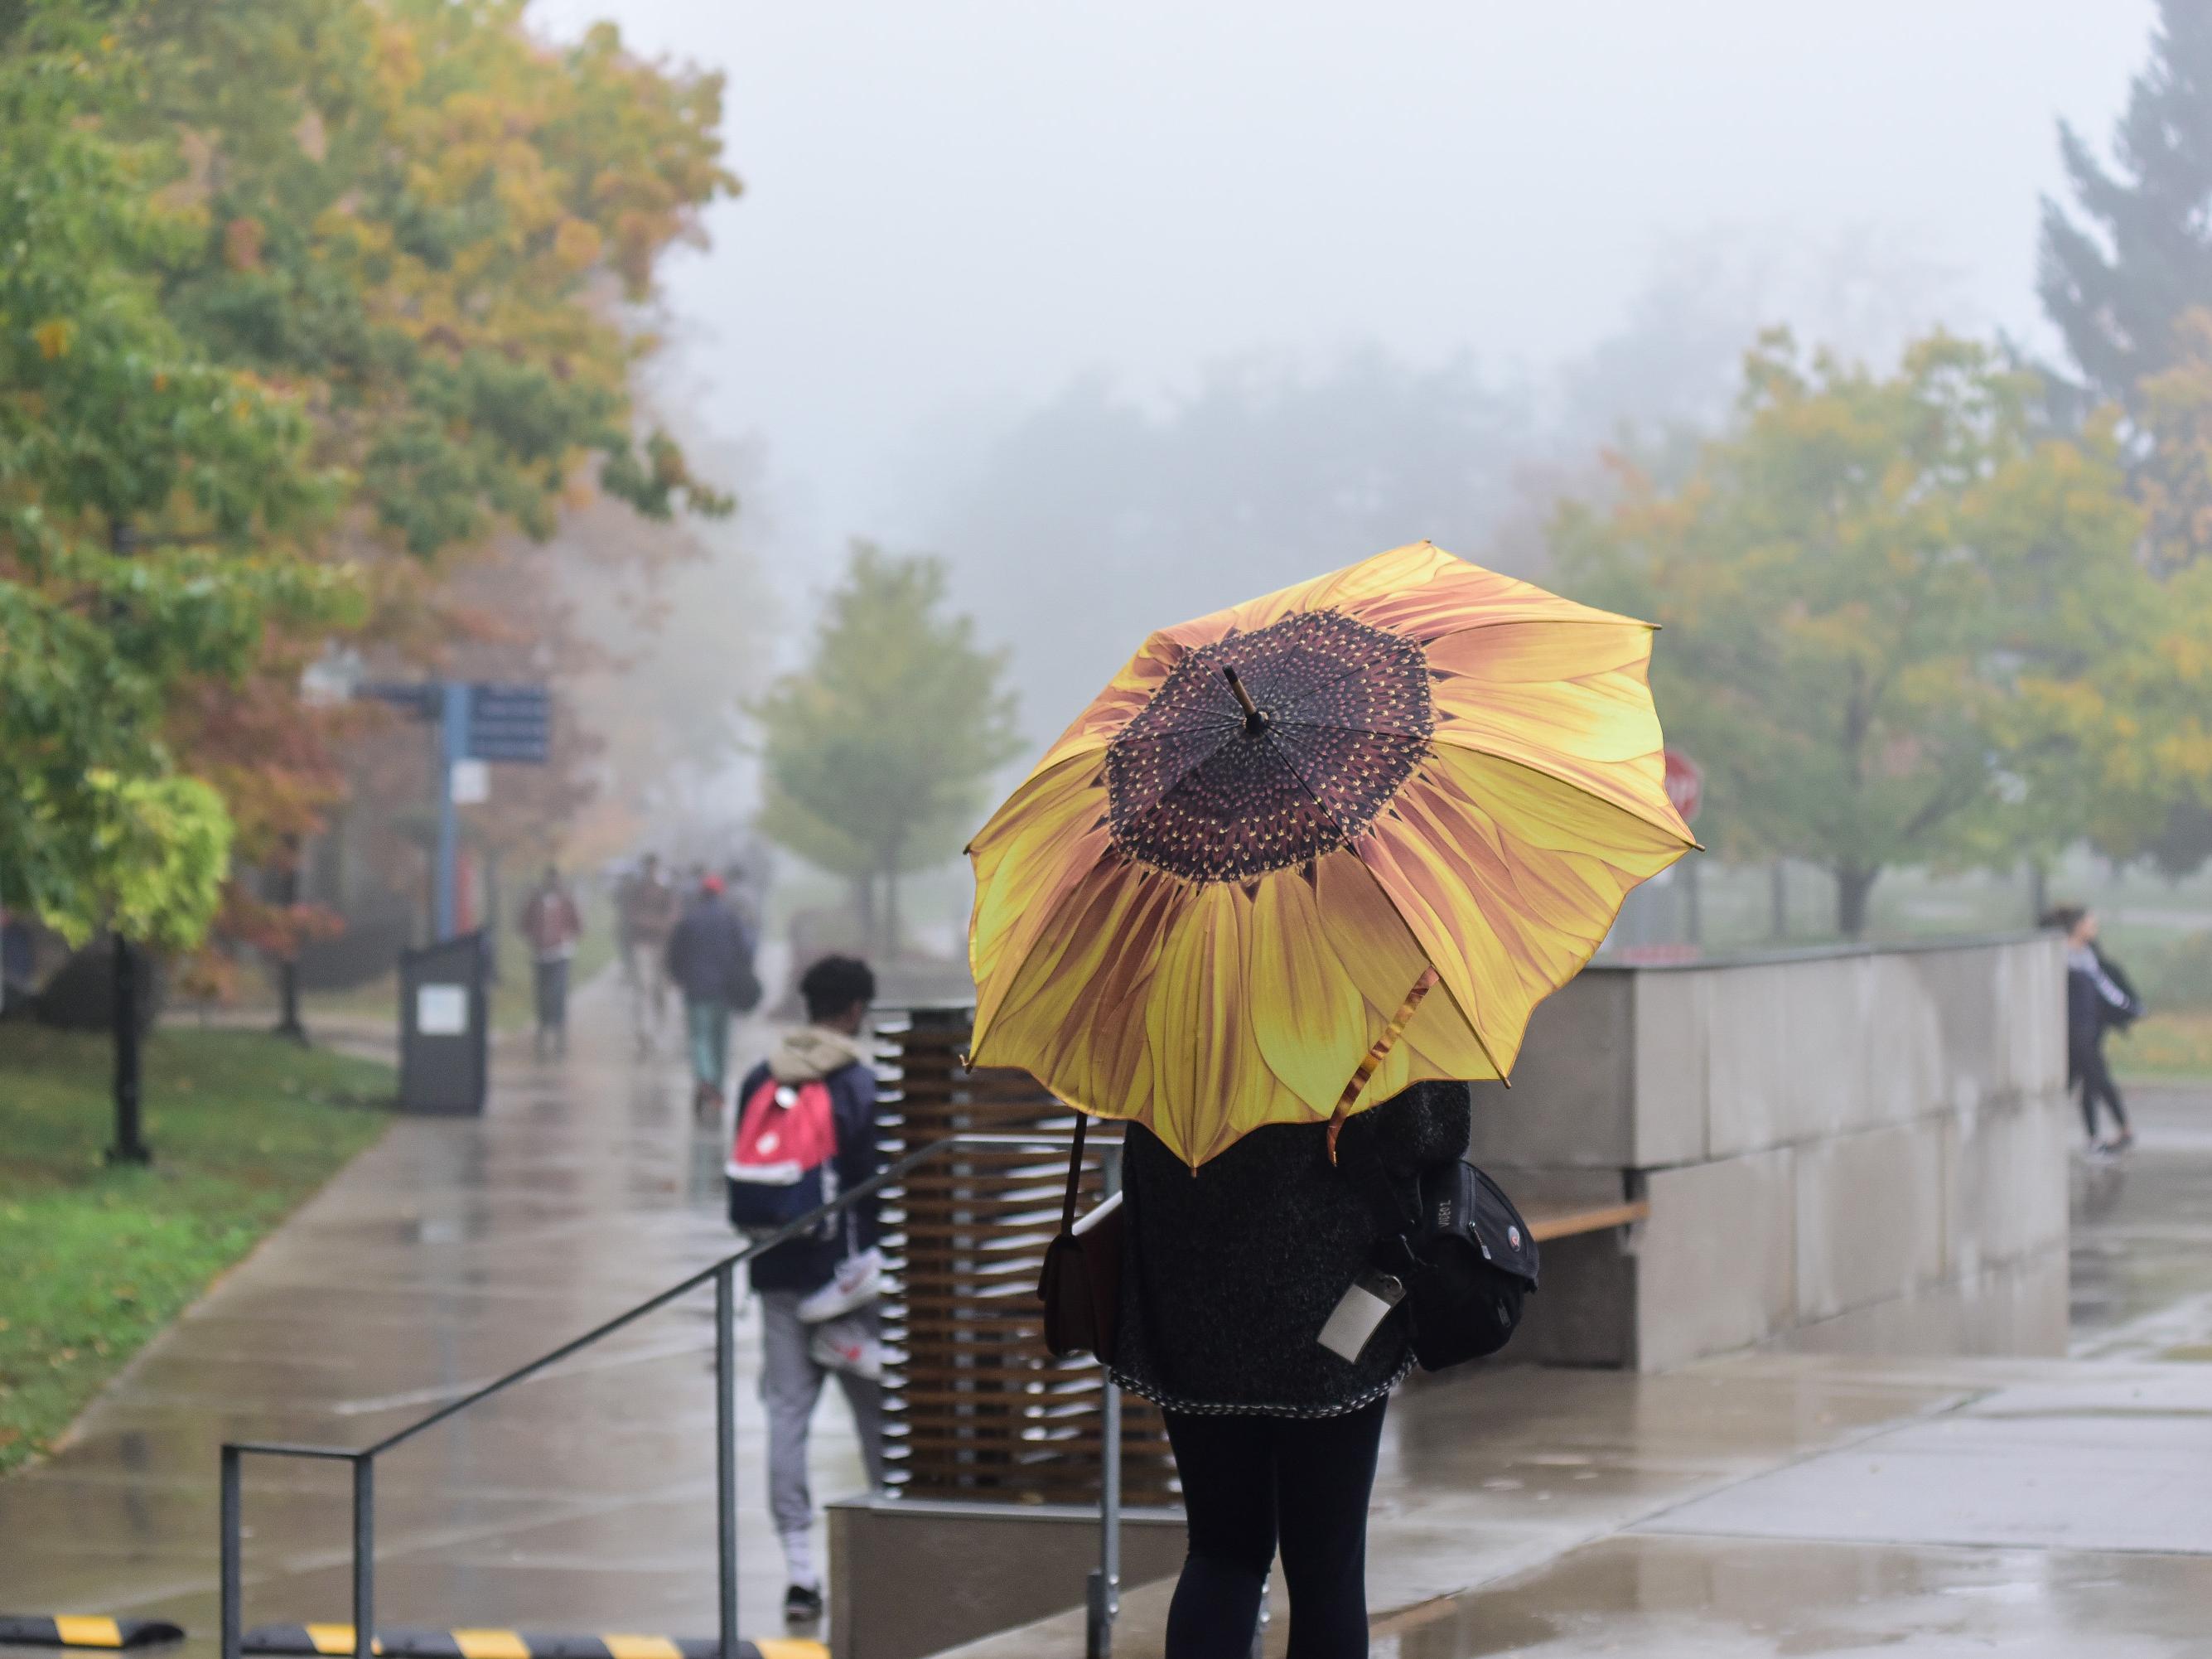 A student with a yellow umbrella in the rain